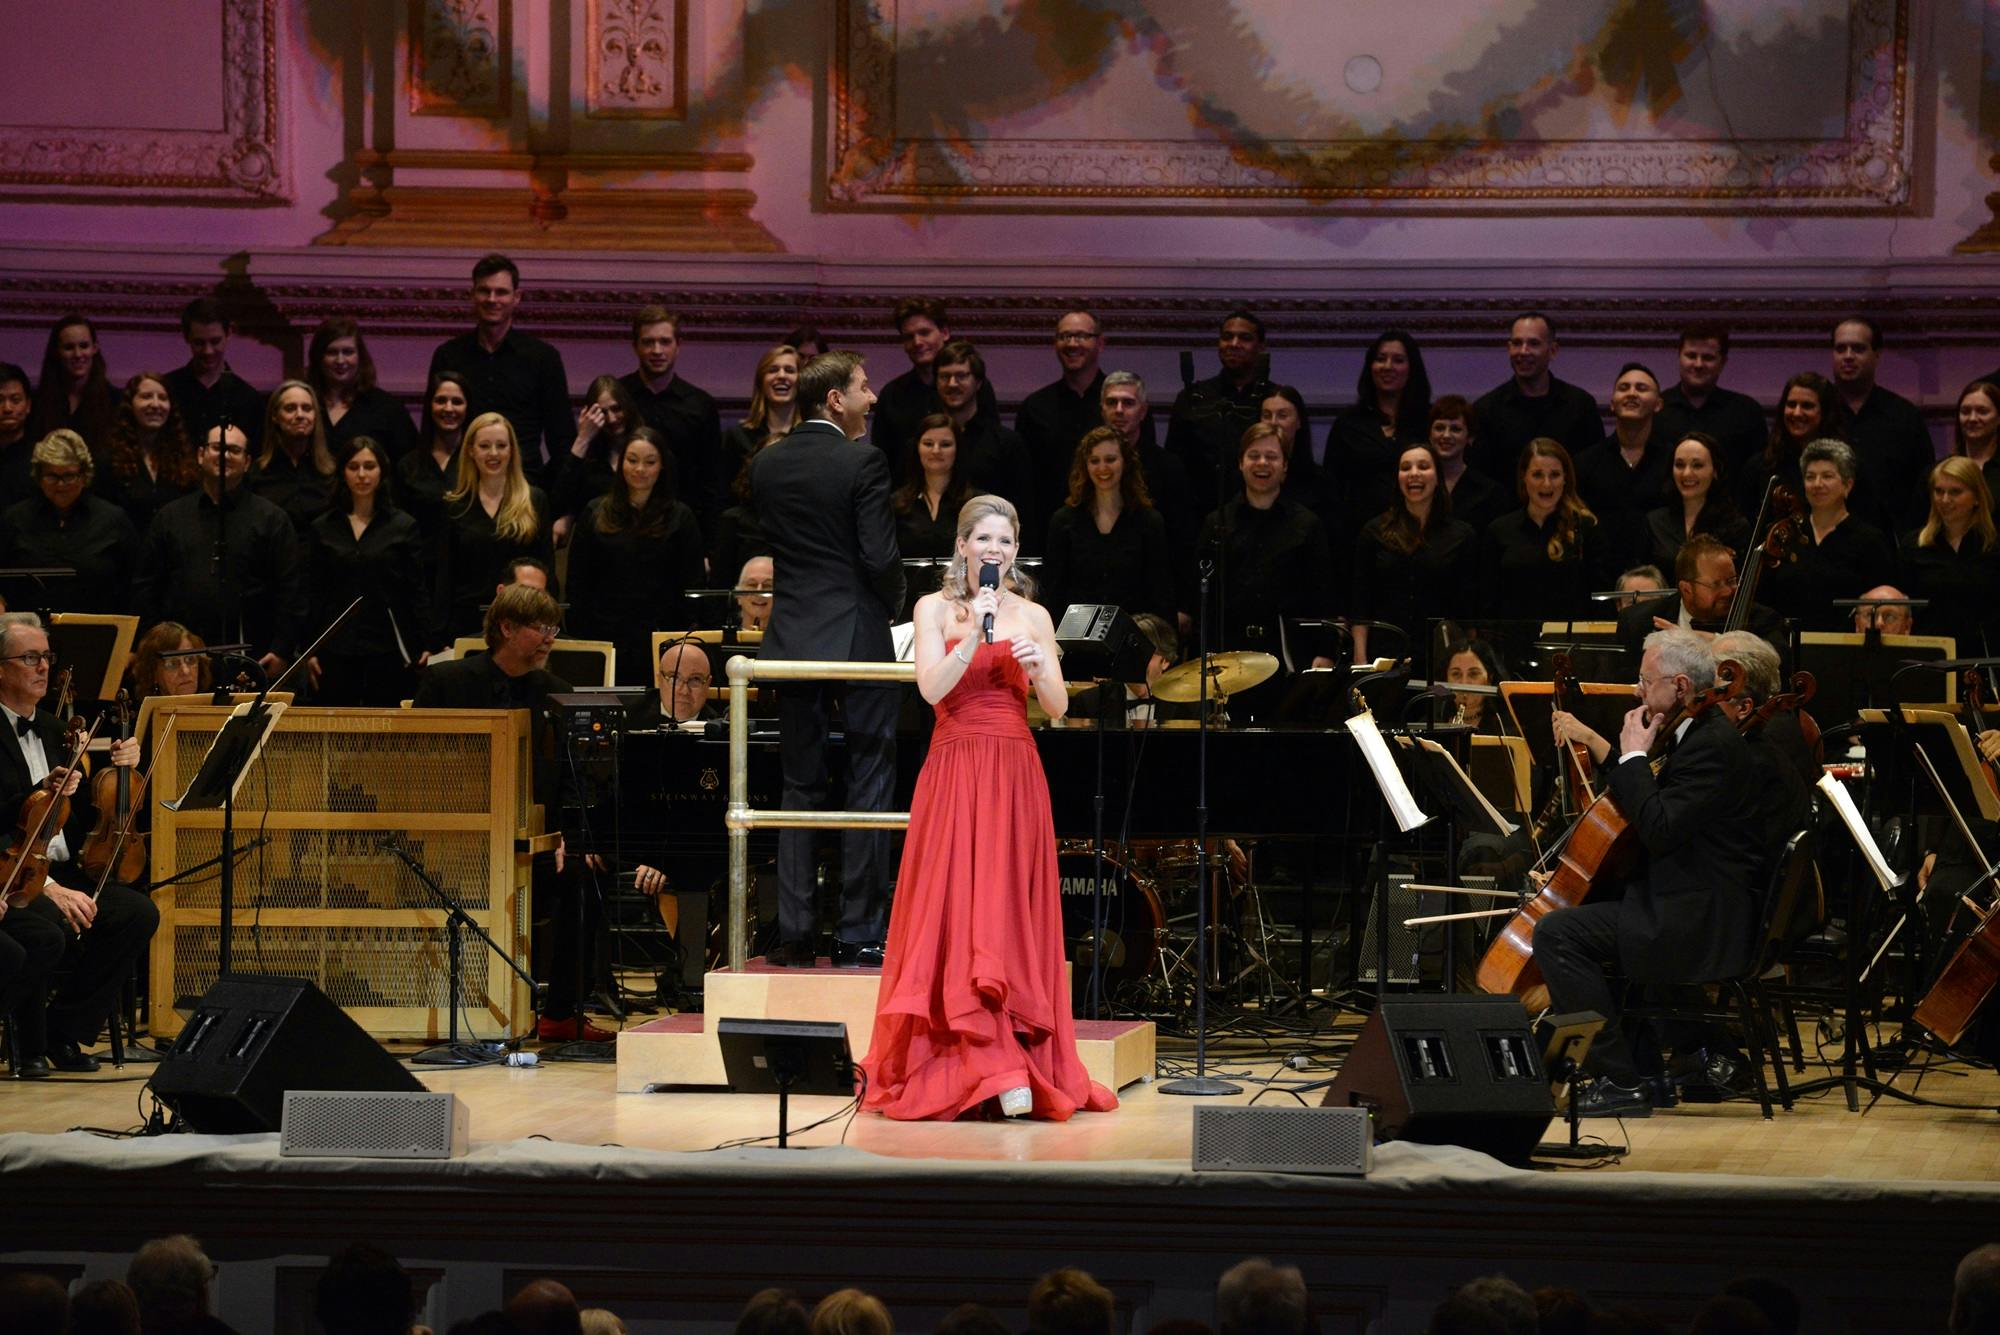 Kelli O’Hara singing a holiday concert with The New York Pops at Carnegie Hall in 2014. © Pete Checchia